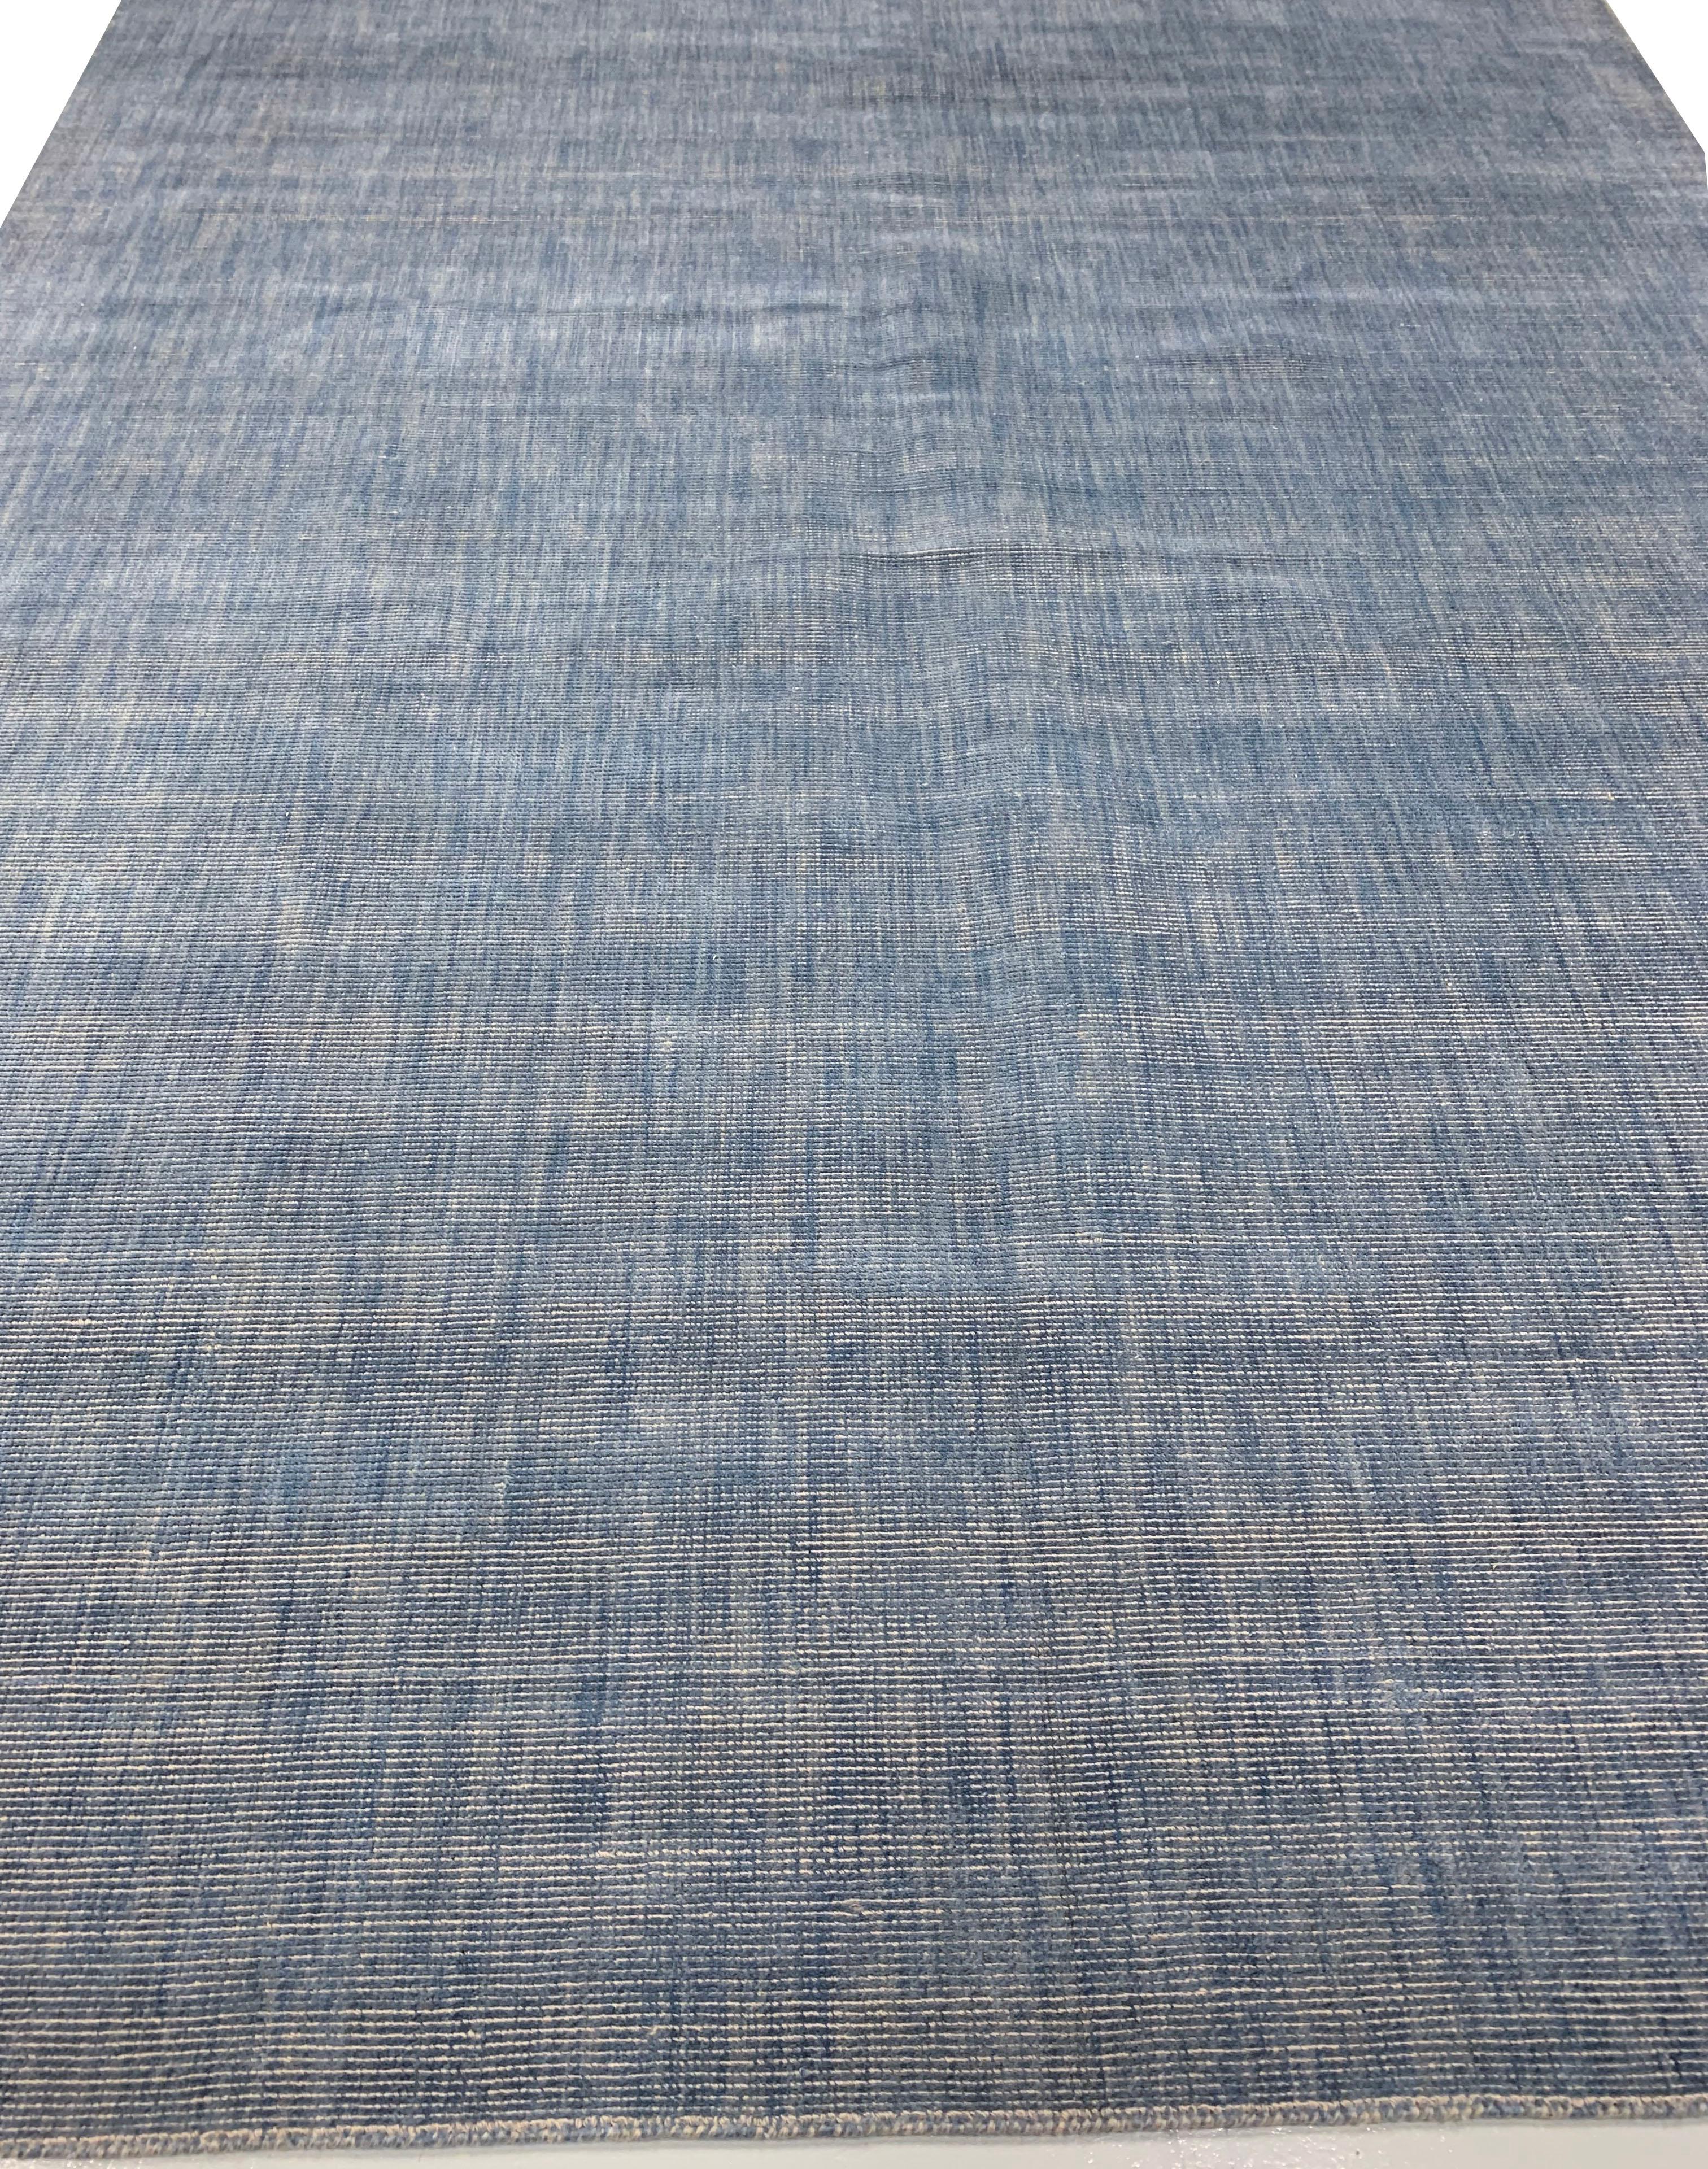 Simplicity blue contemporary area rug 8' x 10'. We call this our “Simplicity” Line, but a closer look reveals that it is not so simple. Yes, we have eliminated borders, yes the pattern is infinite, yes it is purely geometric. But no, it is not a